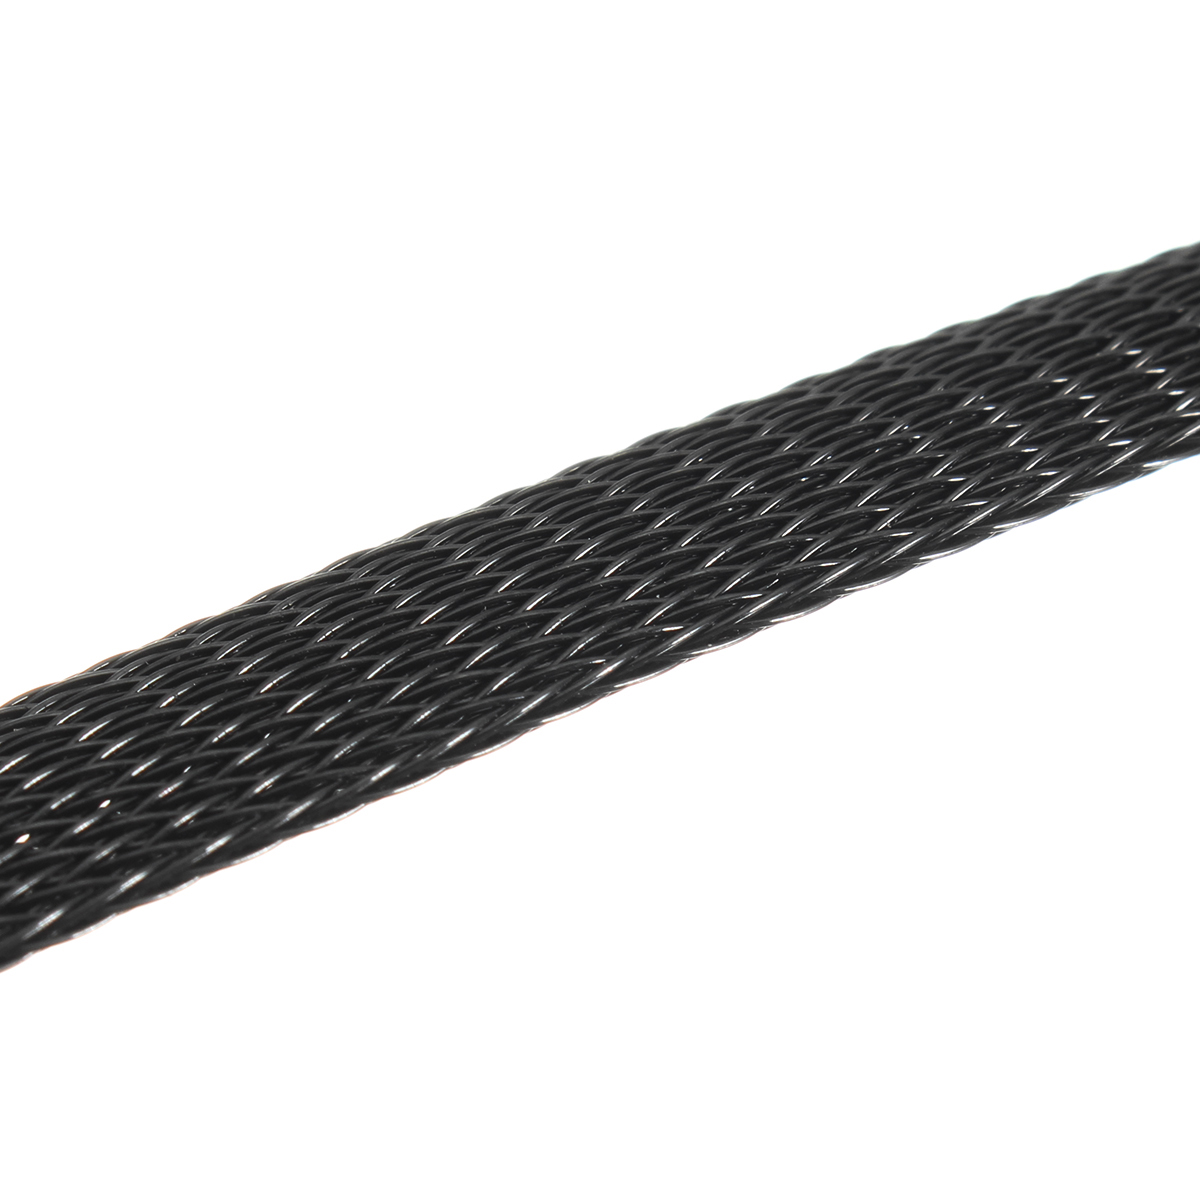 6m-8mm10mm12mm15mm20mm-Wire-Cable-Sheathing-Expandable-Sleeving-Braided-Loom-Tubing-Black-1179628-2